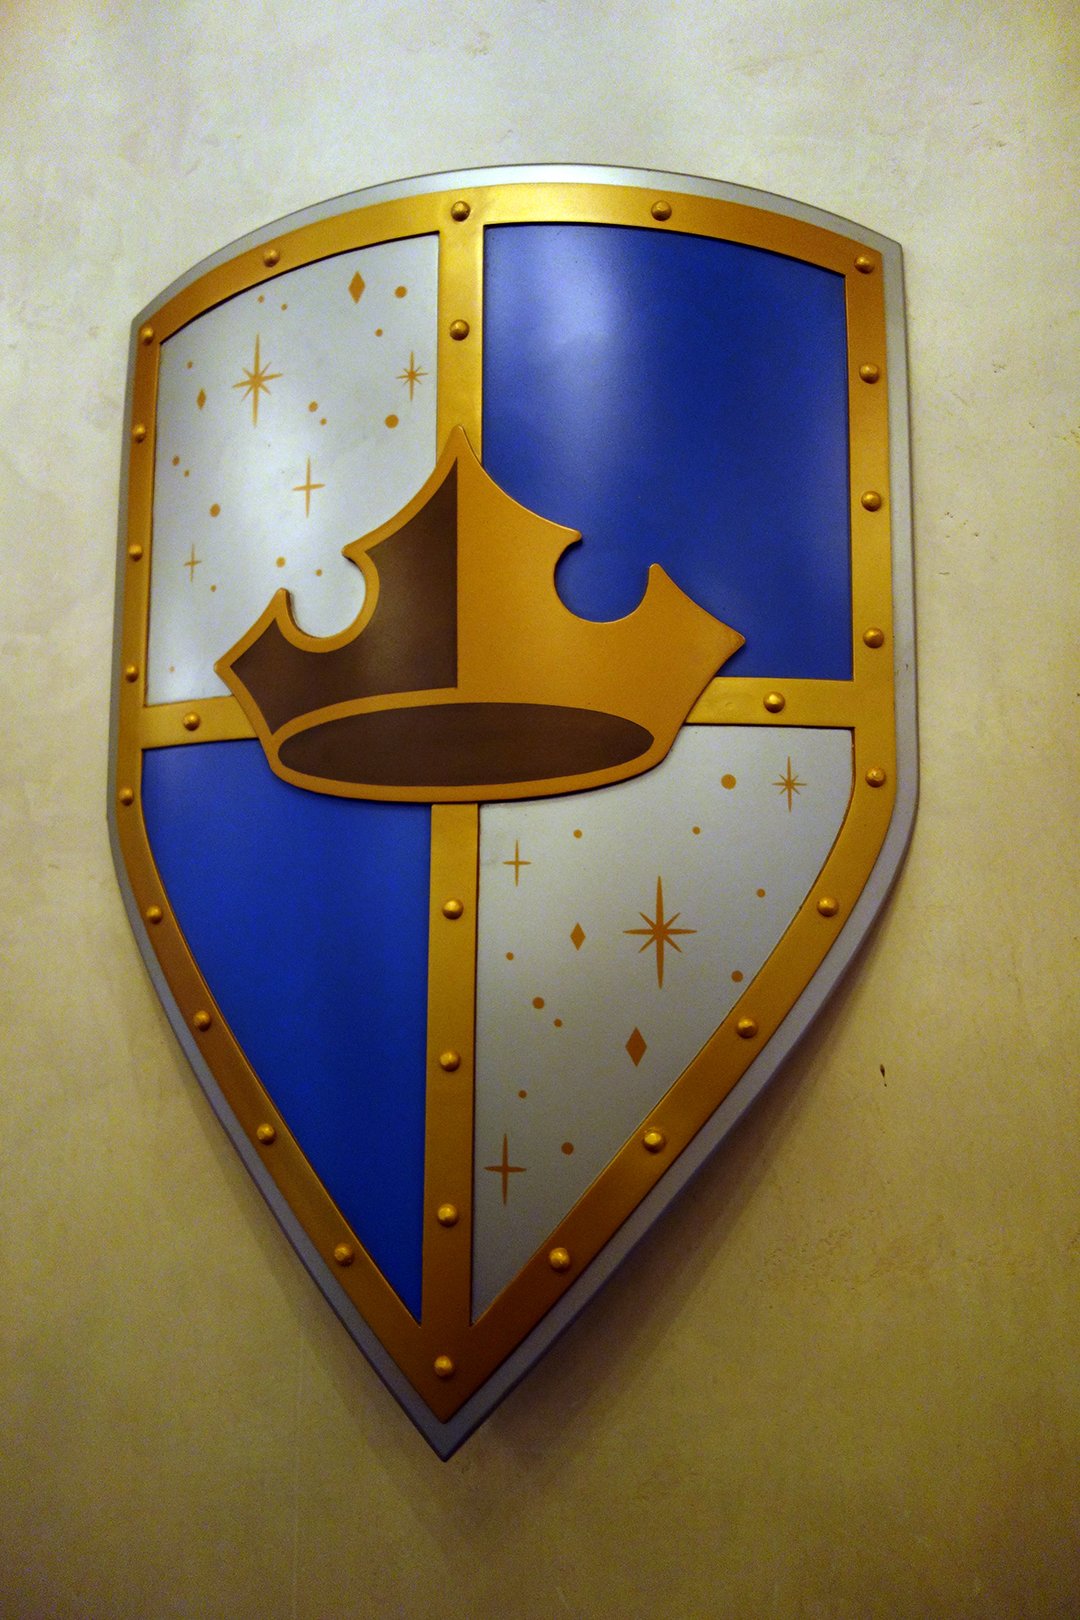 It wouldn't be royal without some shields!